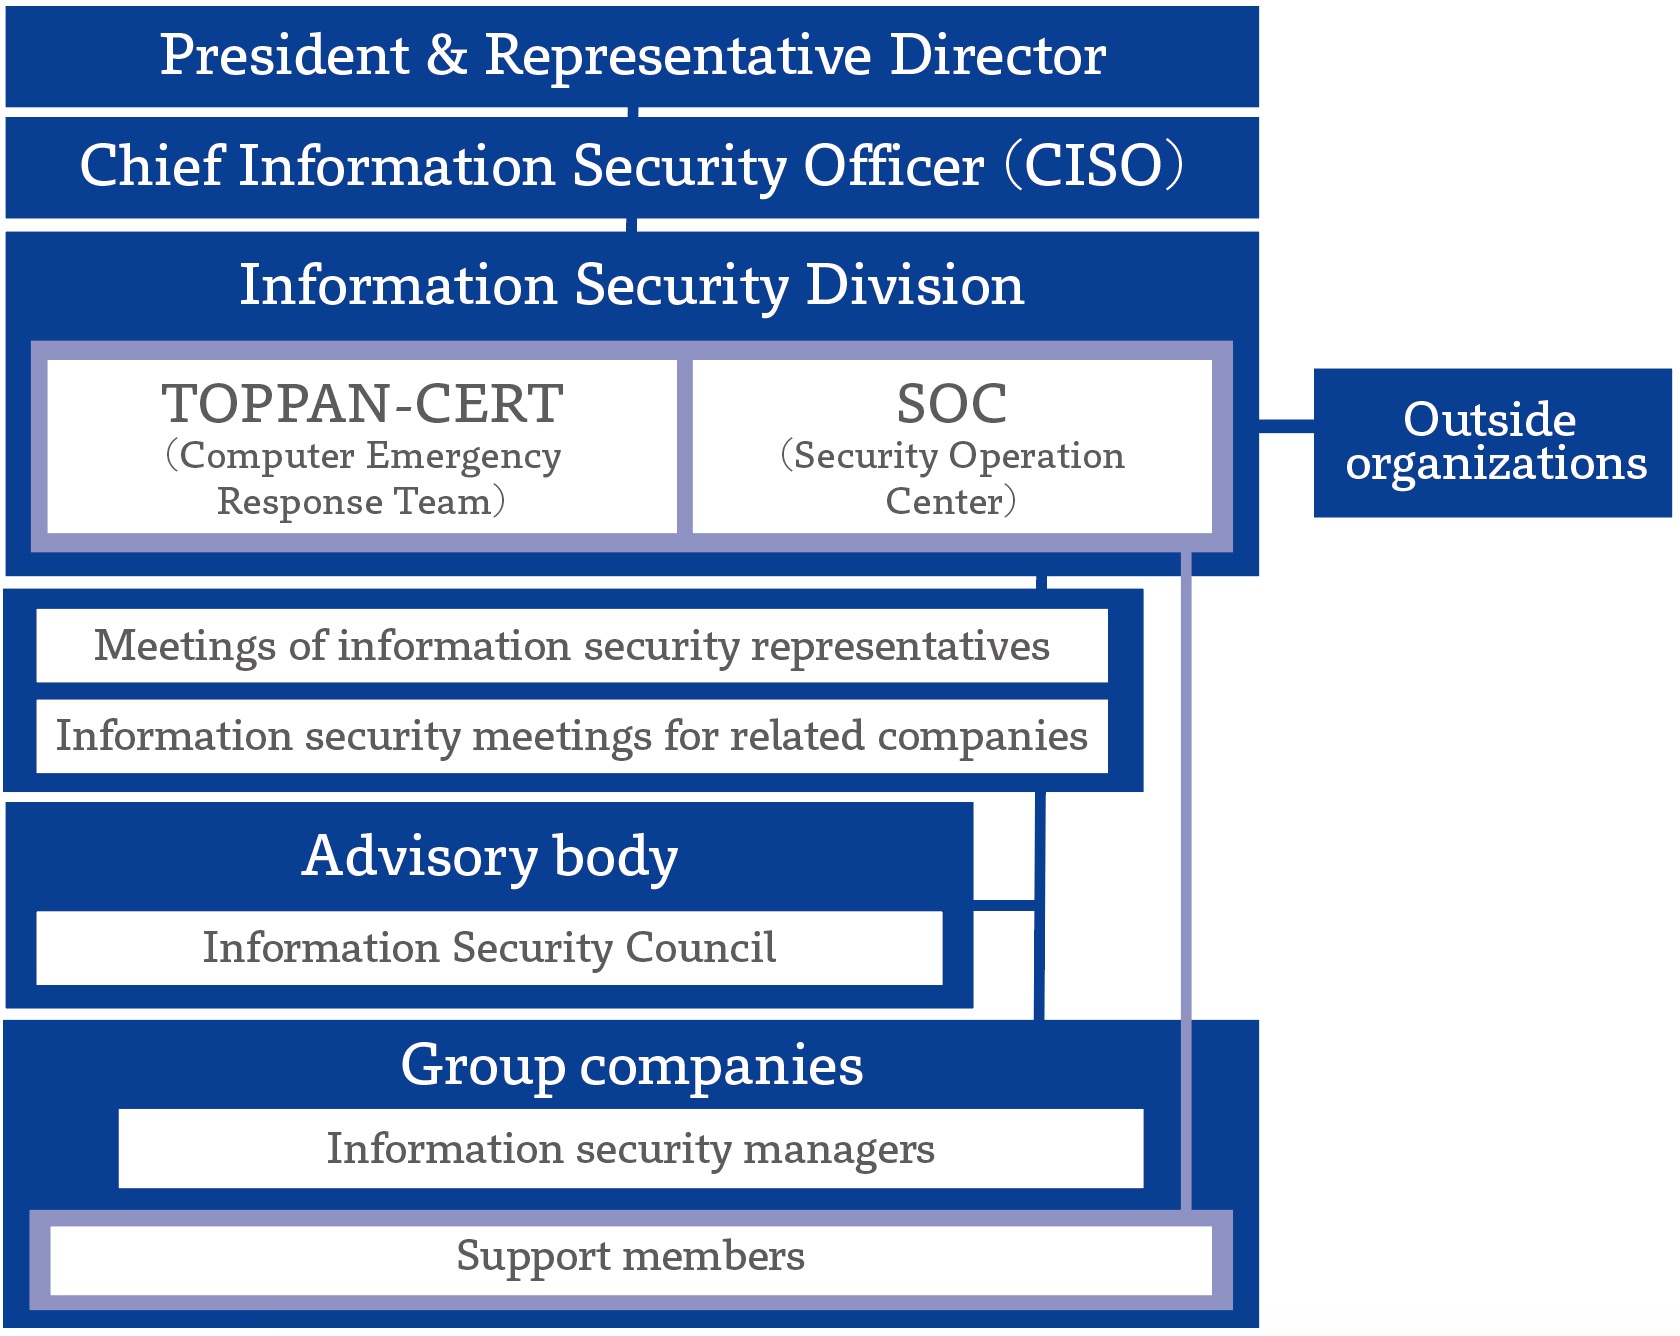 Organizational Structure for Information Security Management